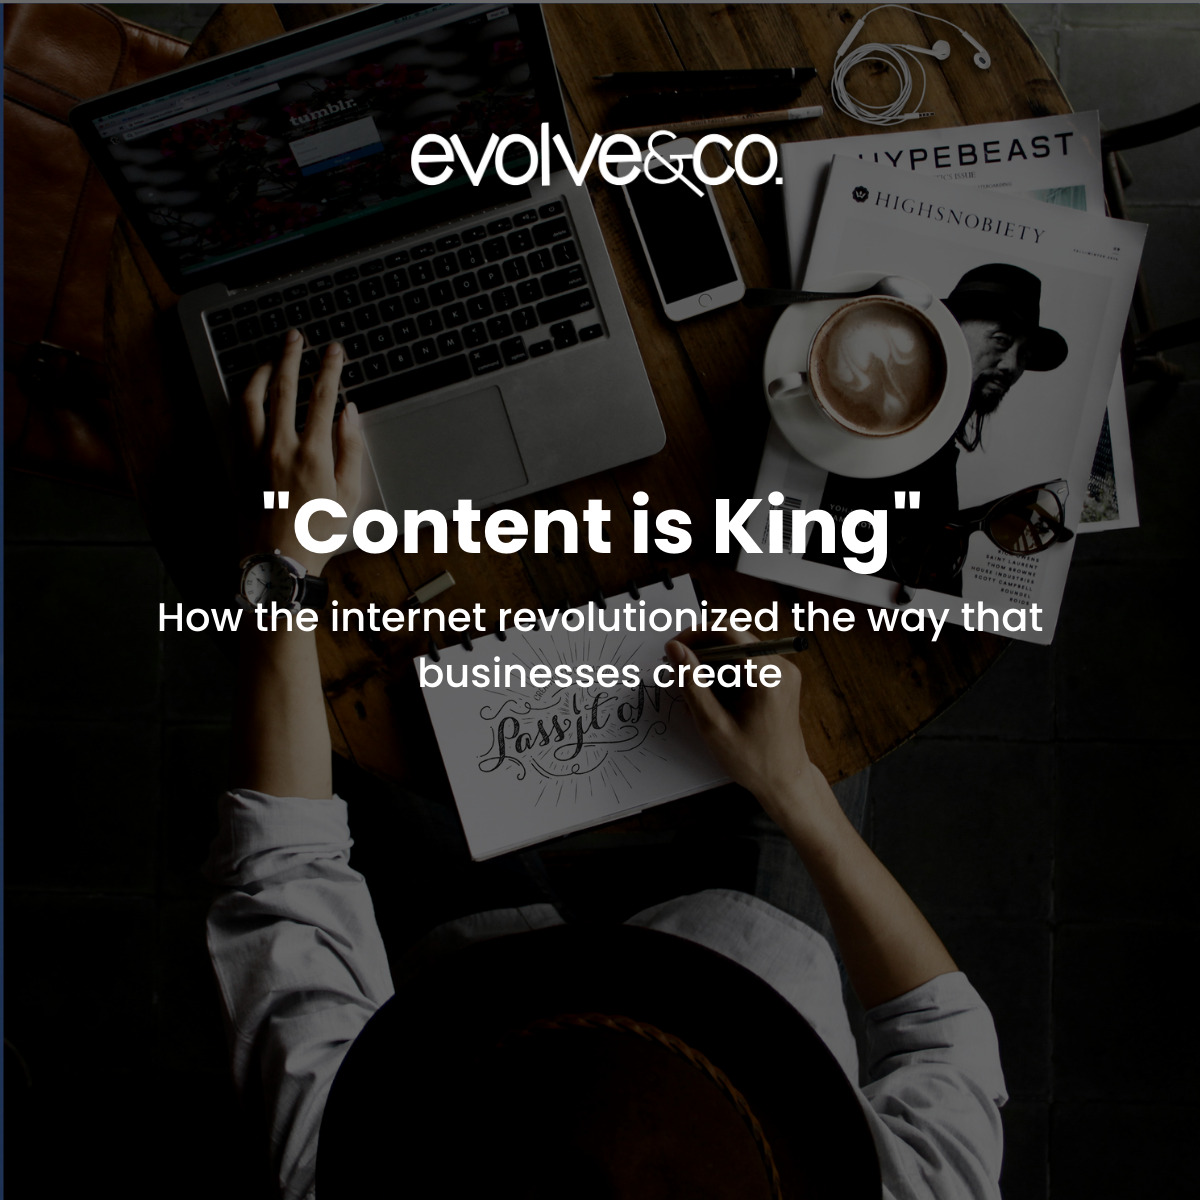 “Content is King”